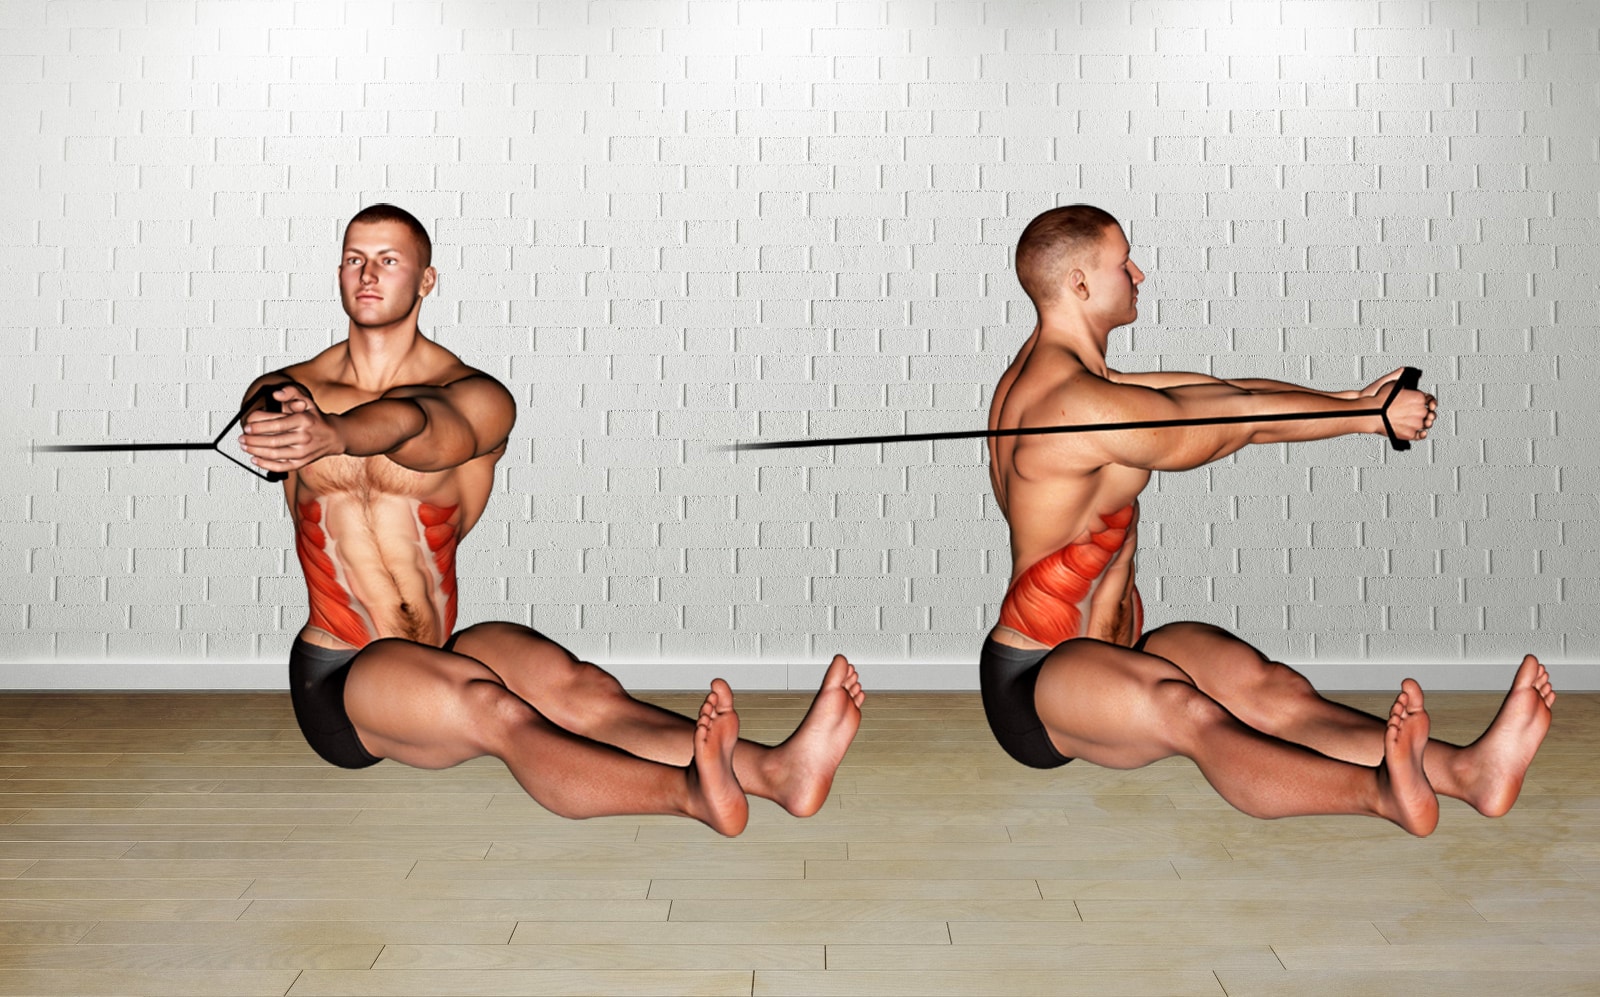 Seated Back Twist by David C. - Exercise How-to - Skimble